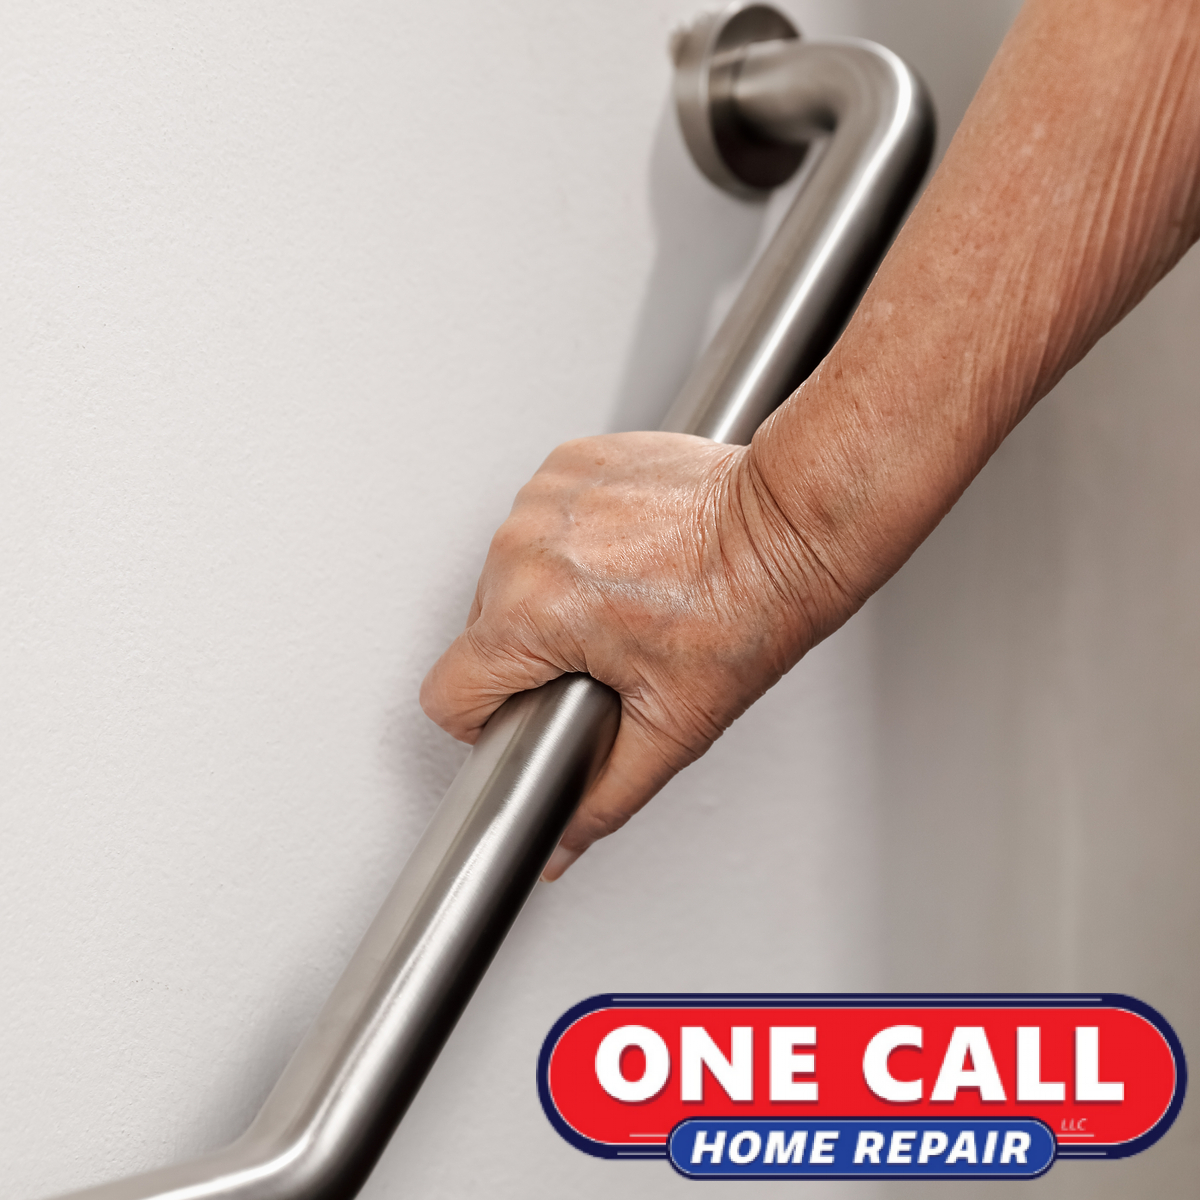 Make Your Home Safer By Adding An ADA Handrail Or Grab Bar